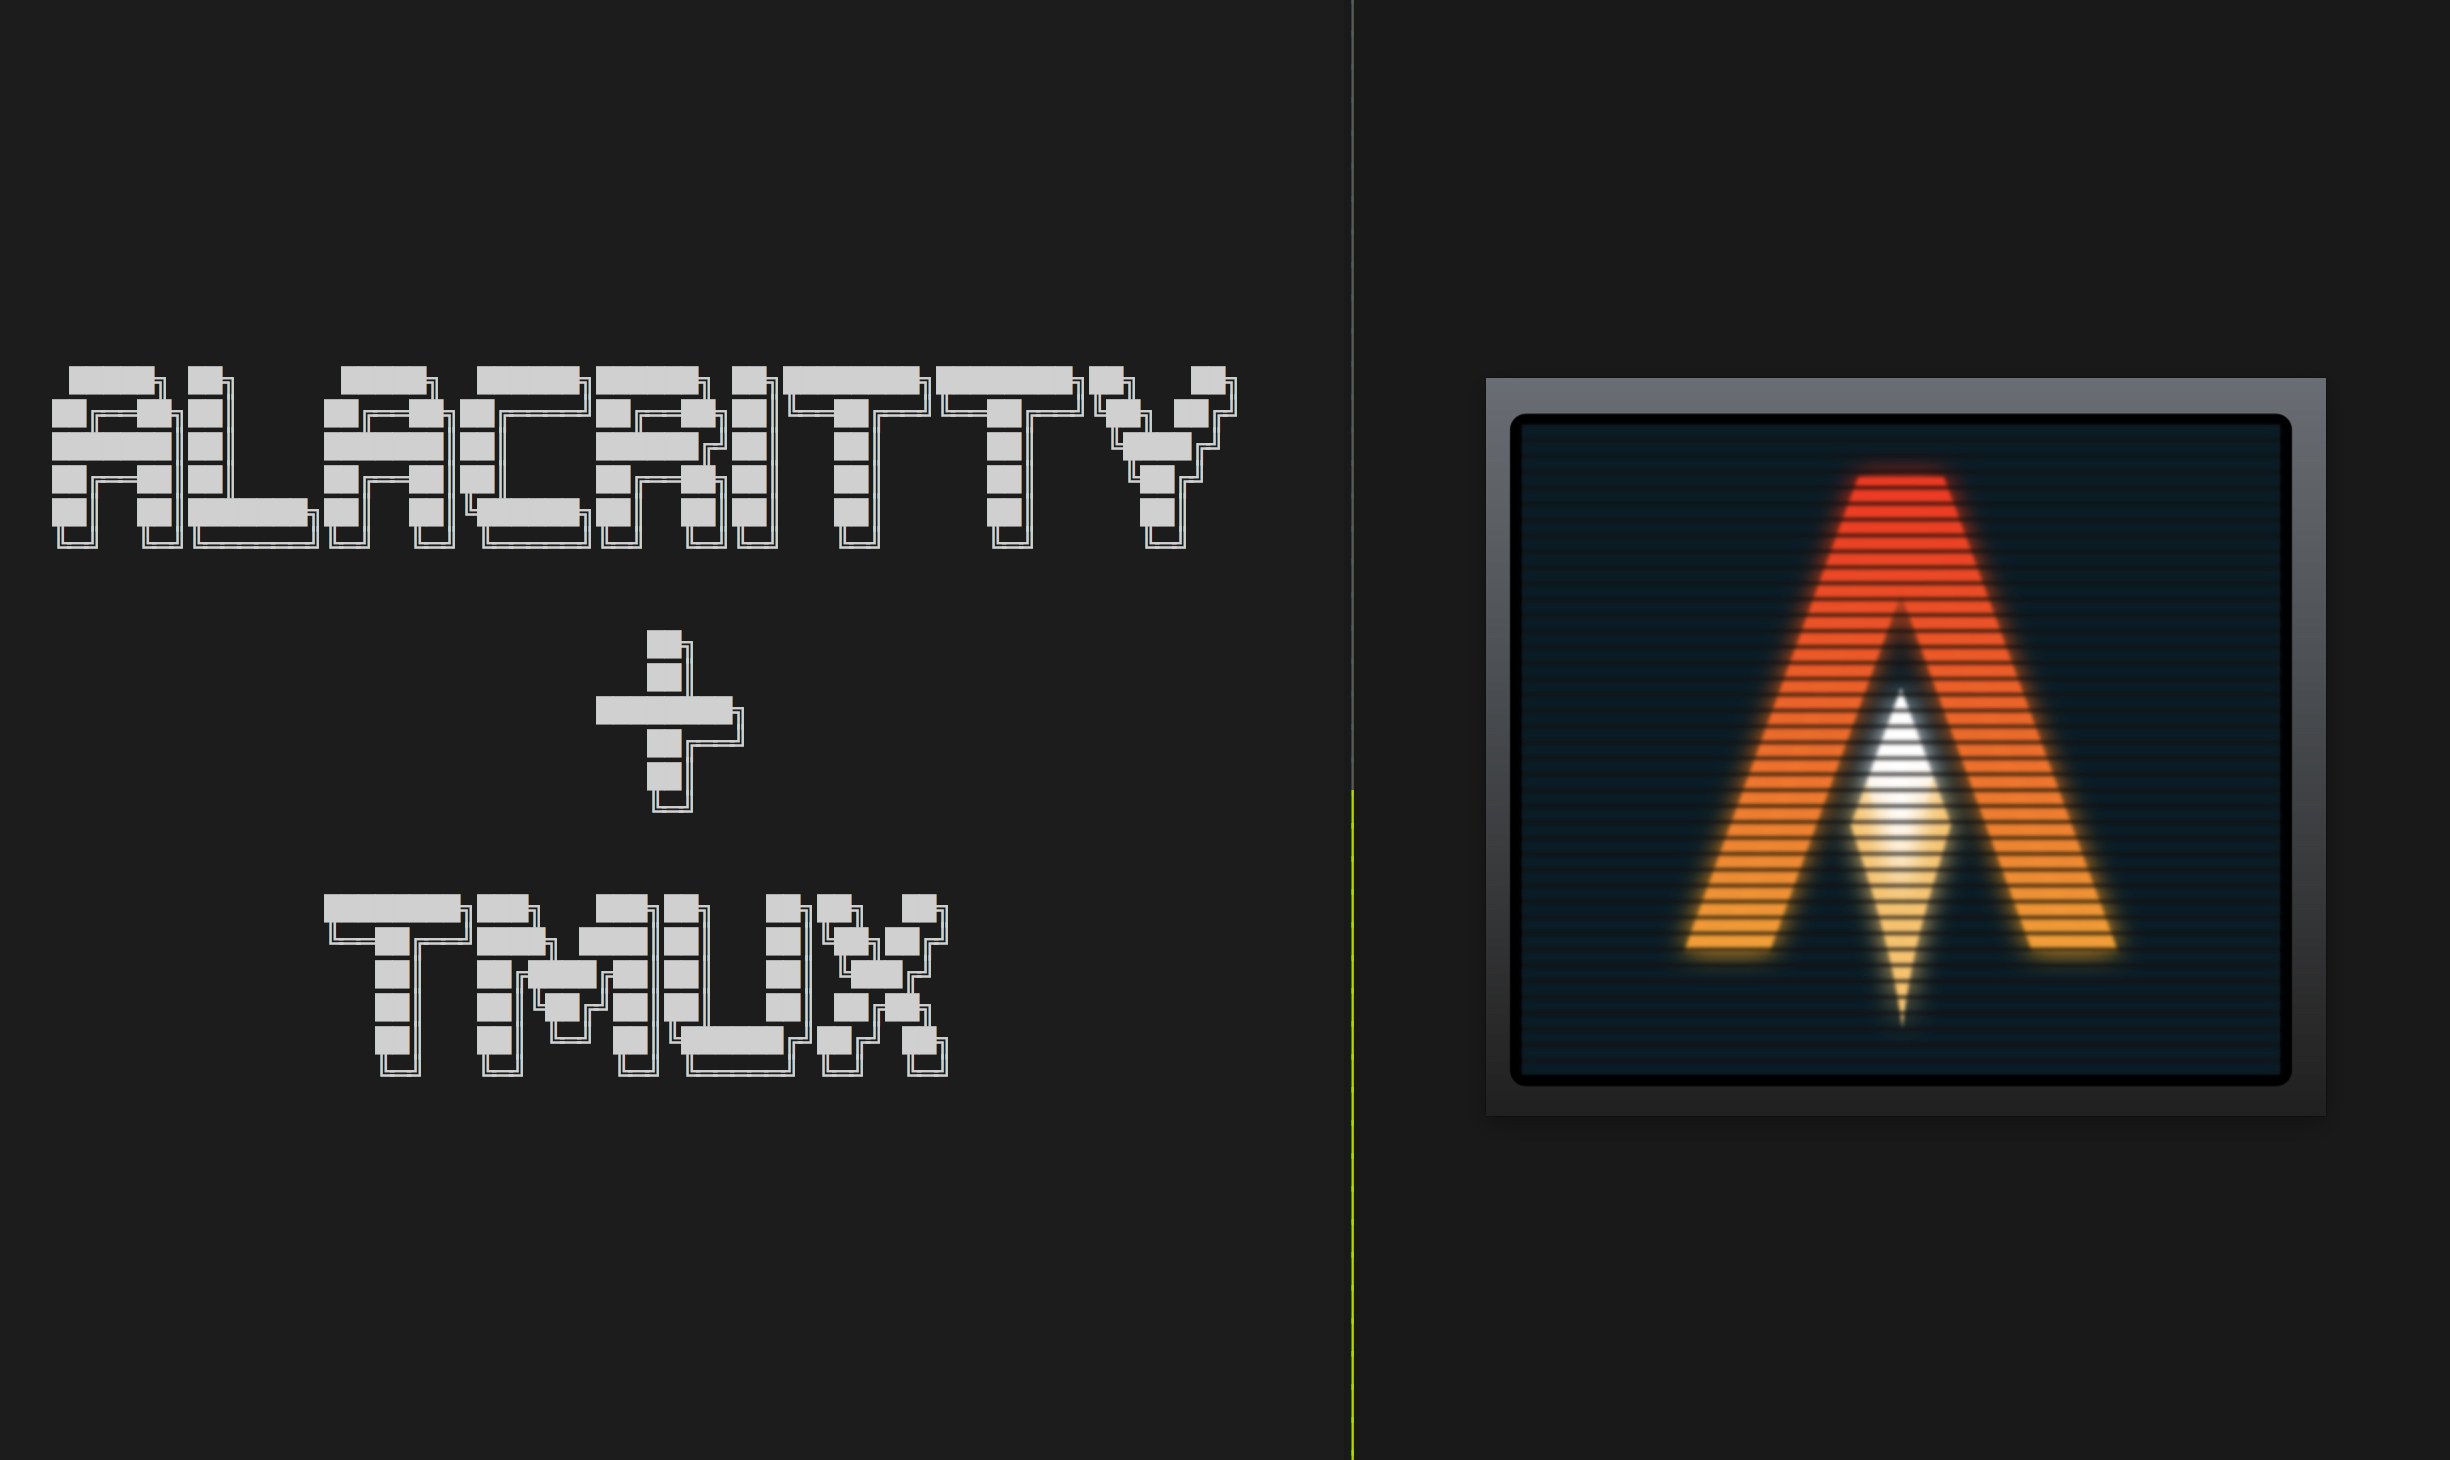 Alacritty integration with Tmux